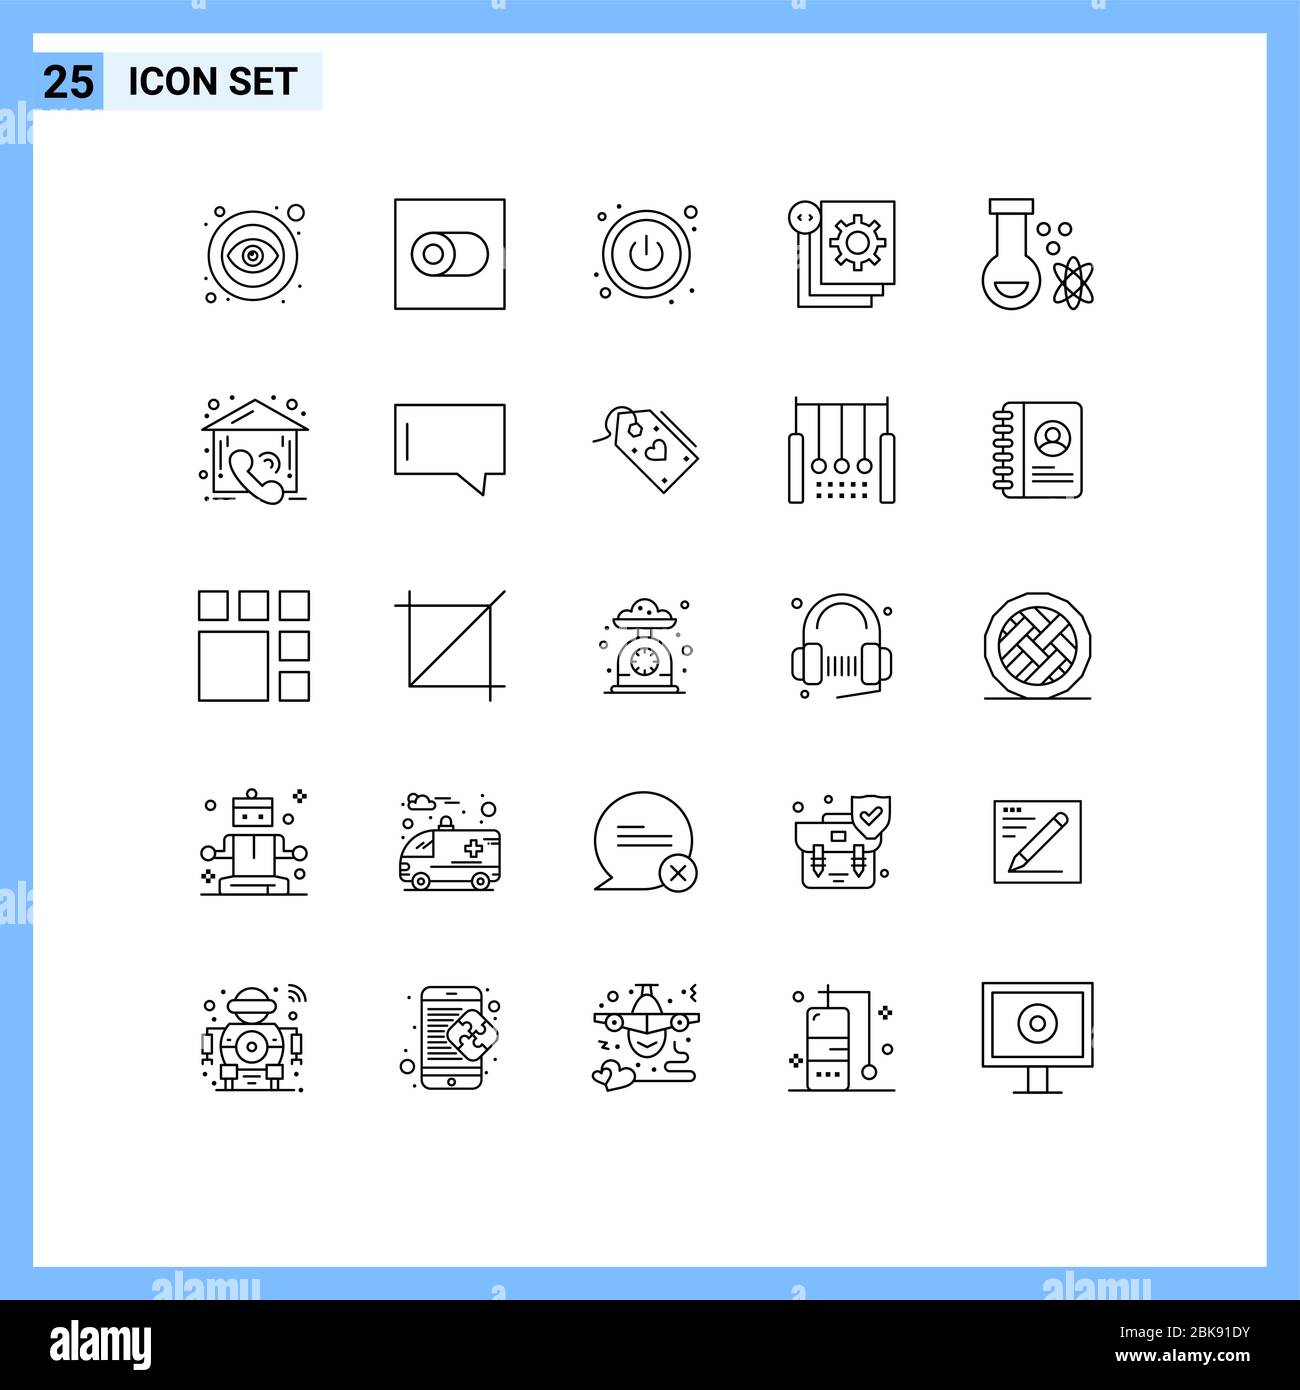 Universal Icon Symbols Group of 25 Modern Lines of space, potion, switch, atom, process Editable Vector Design Elements Stock Vector